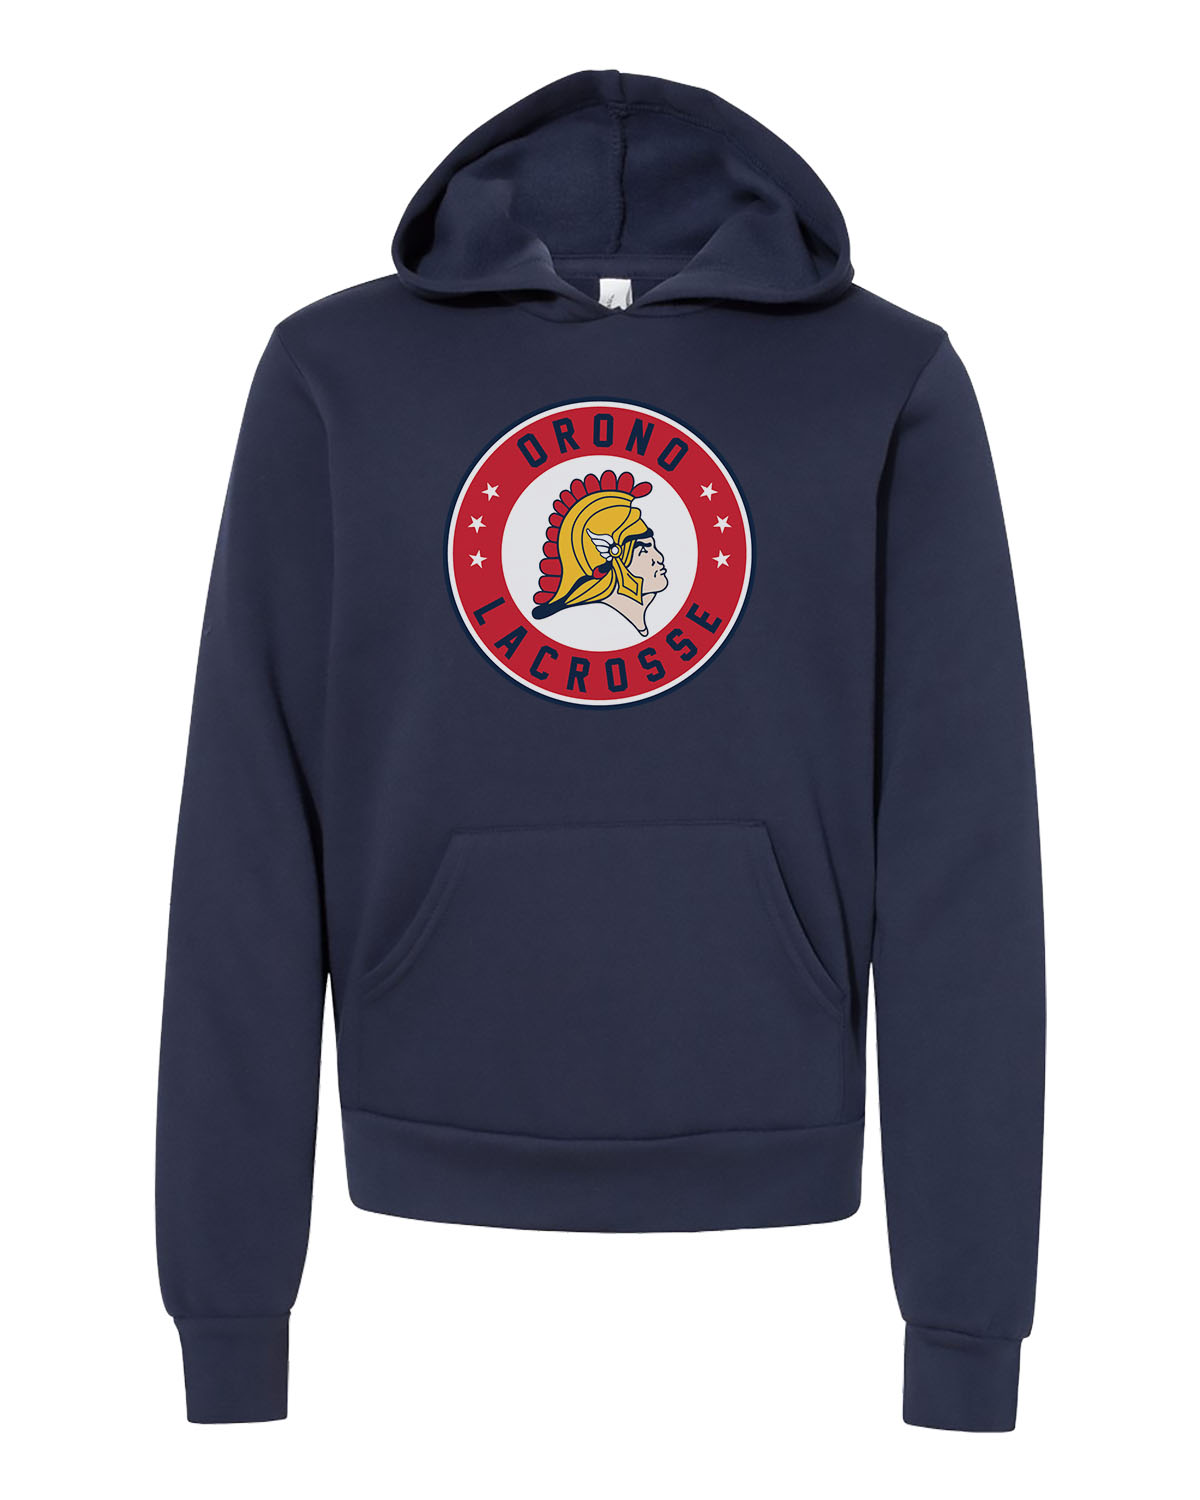 Orono Lacrosse // Youth Hoodie